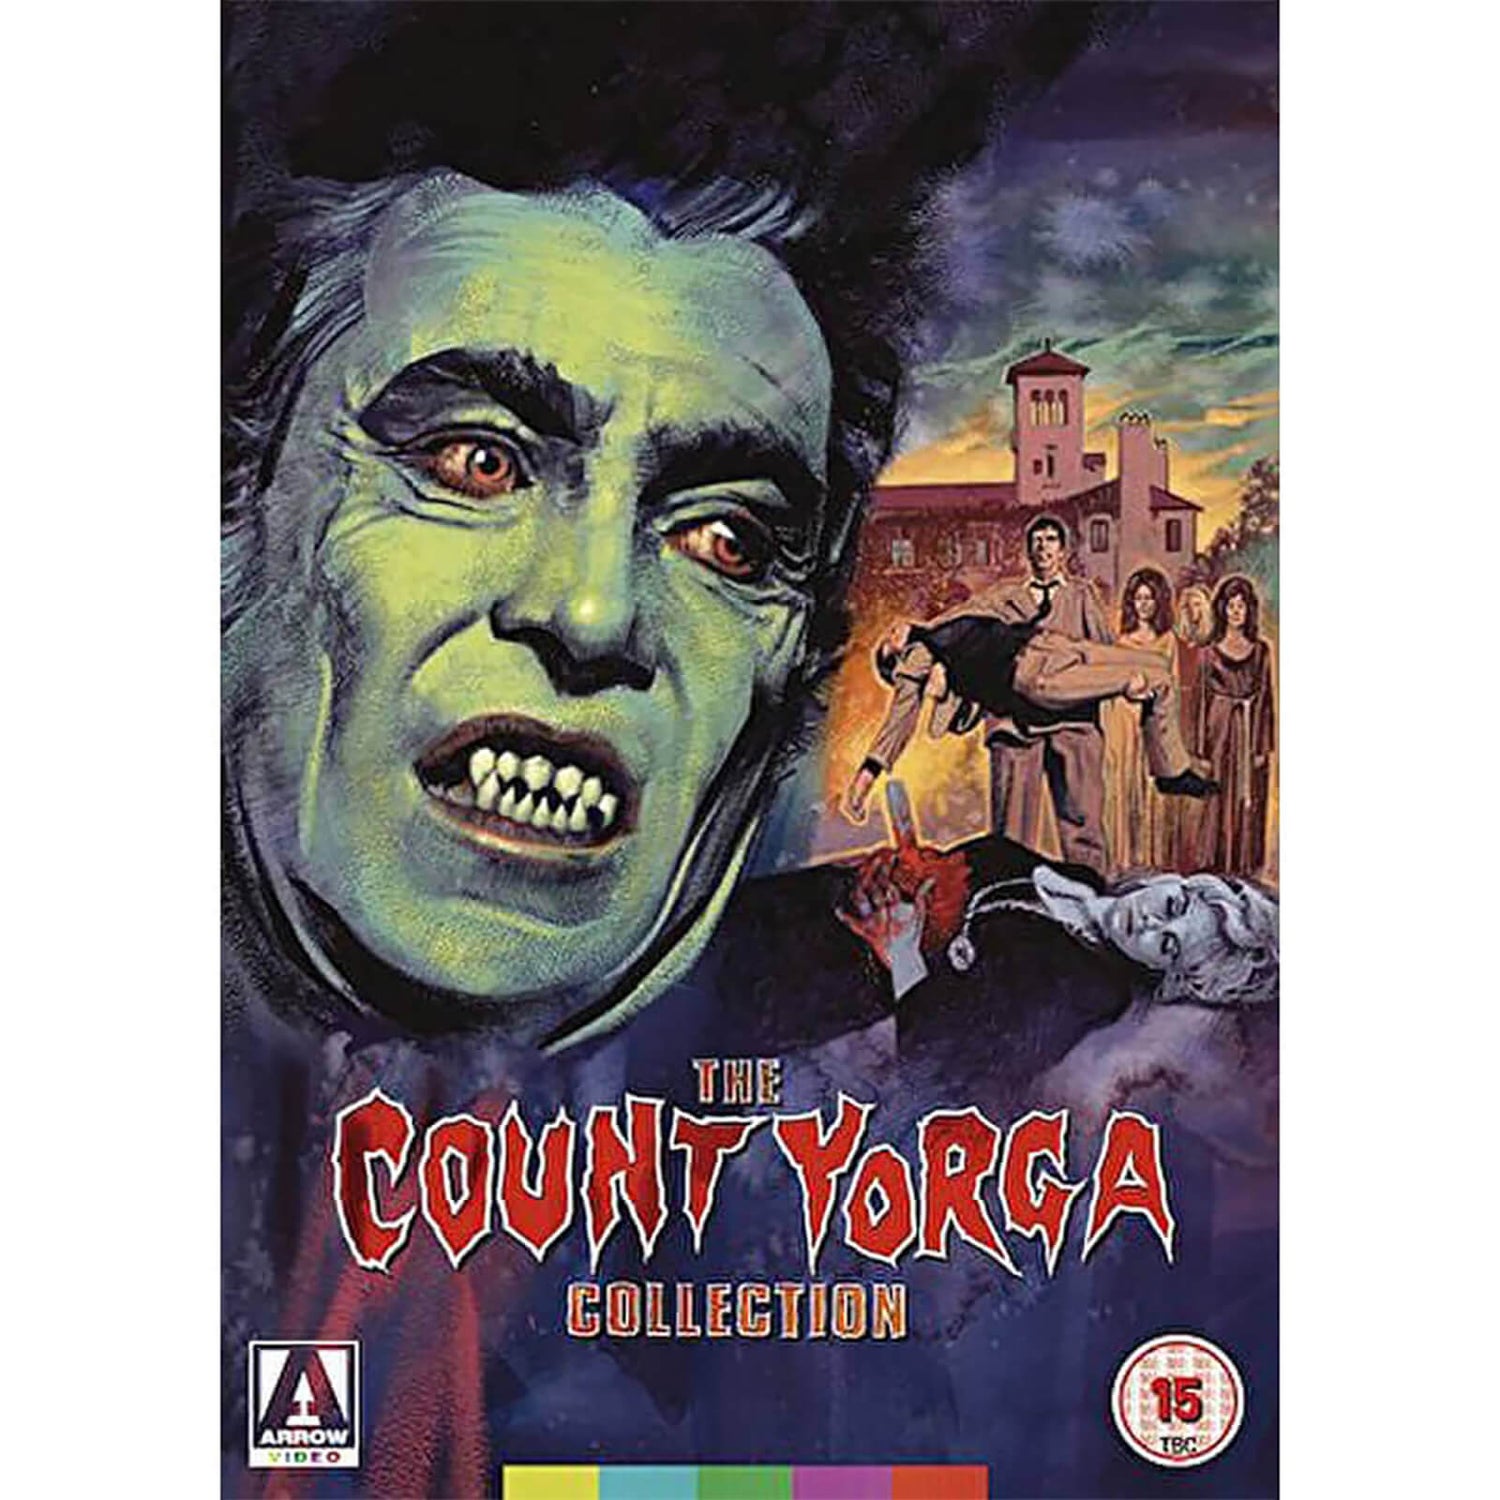 The Complete Count Yorga